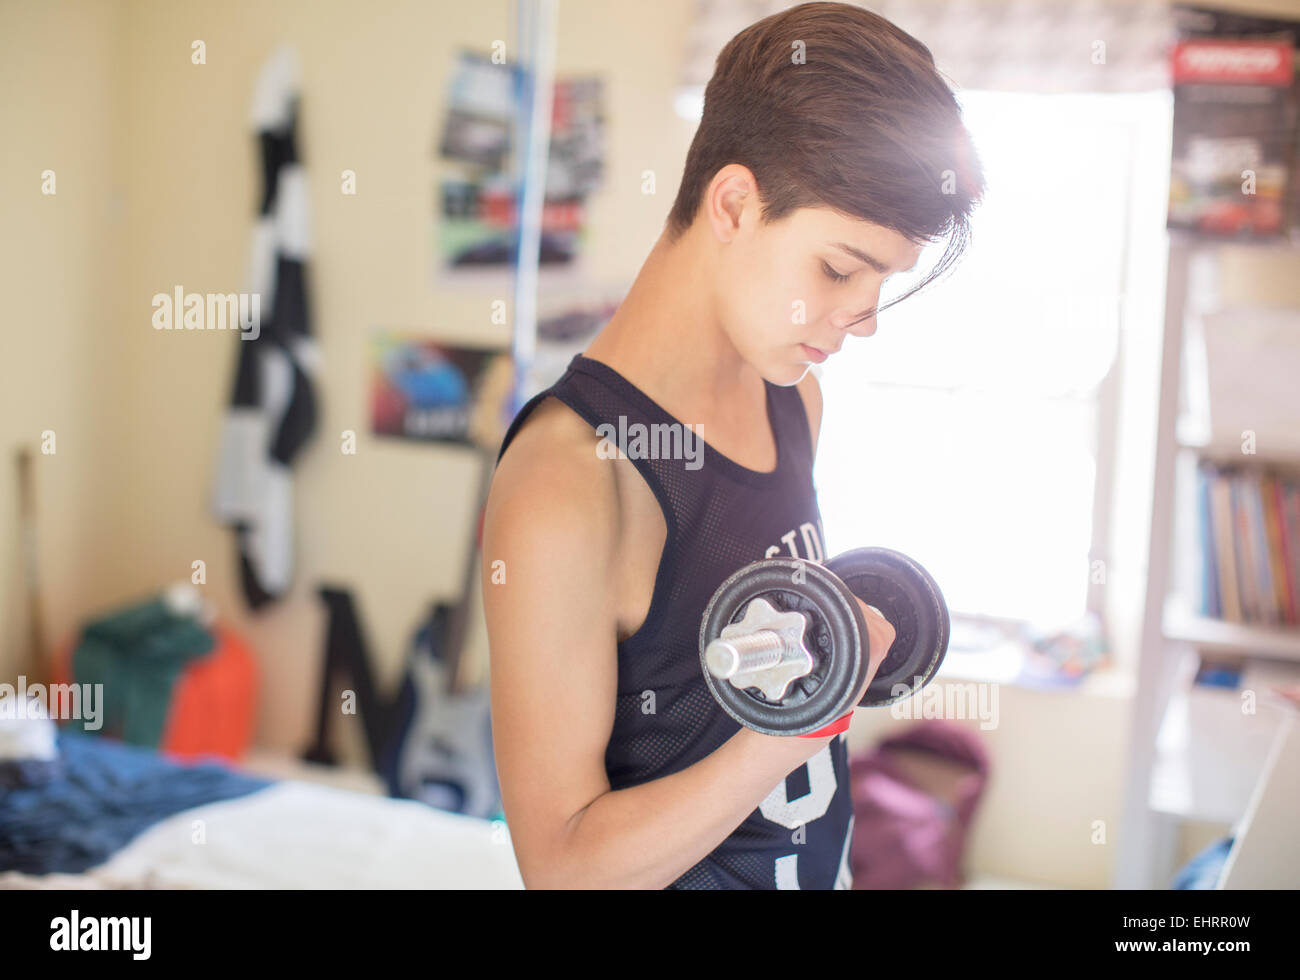 Teenage boy exercising with dumb bell Stock Photo